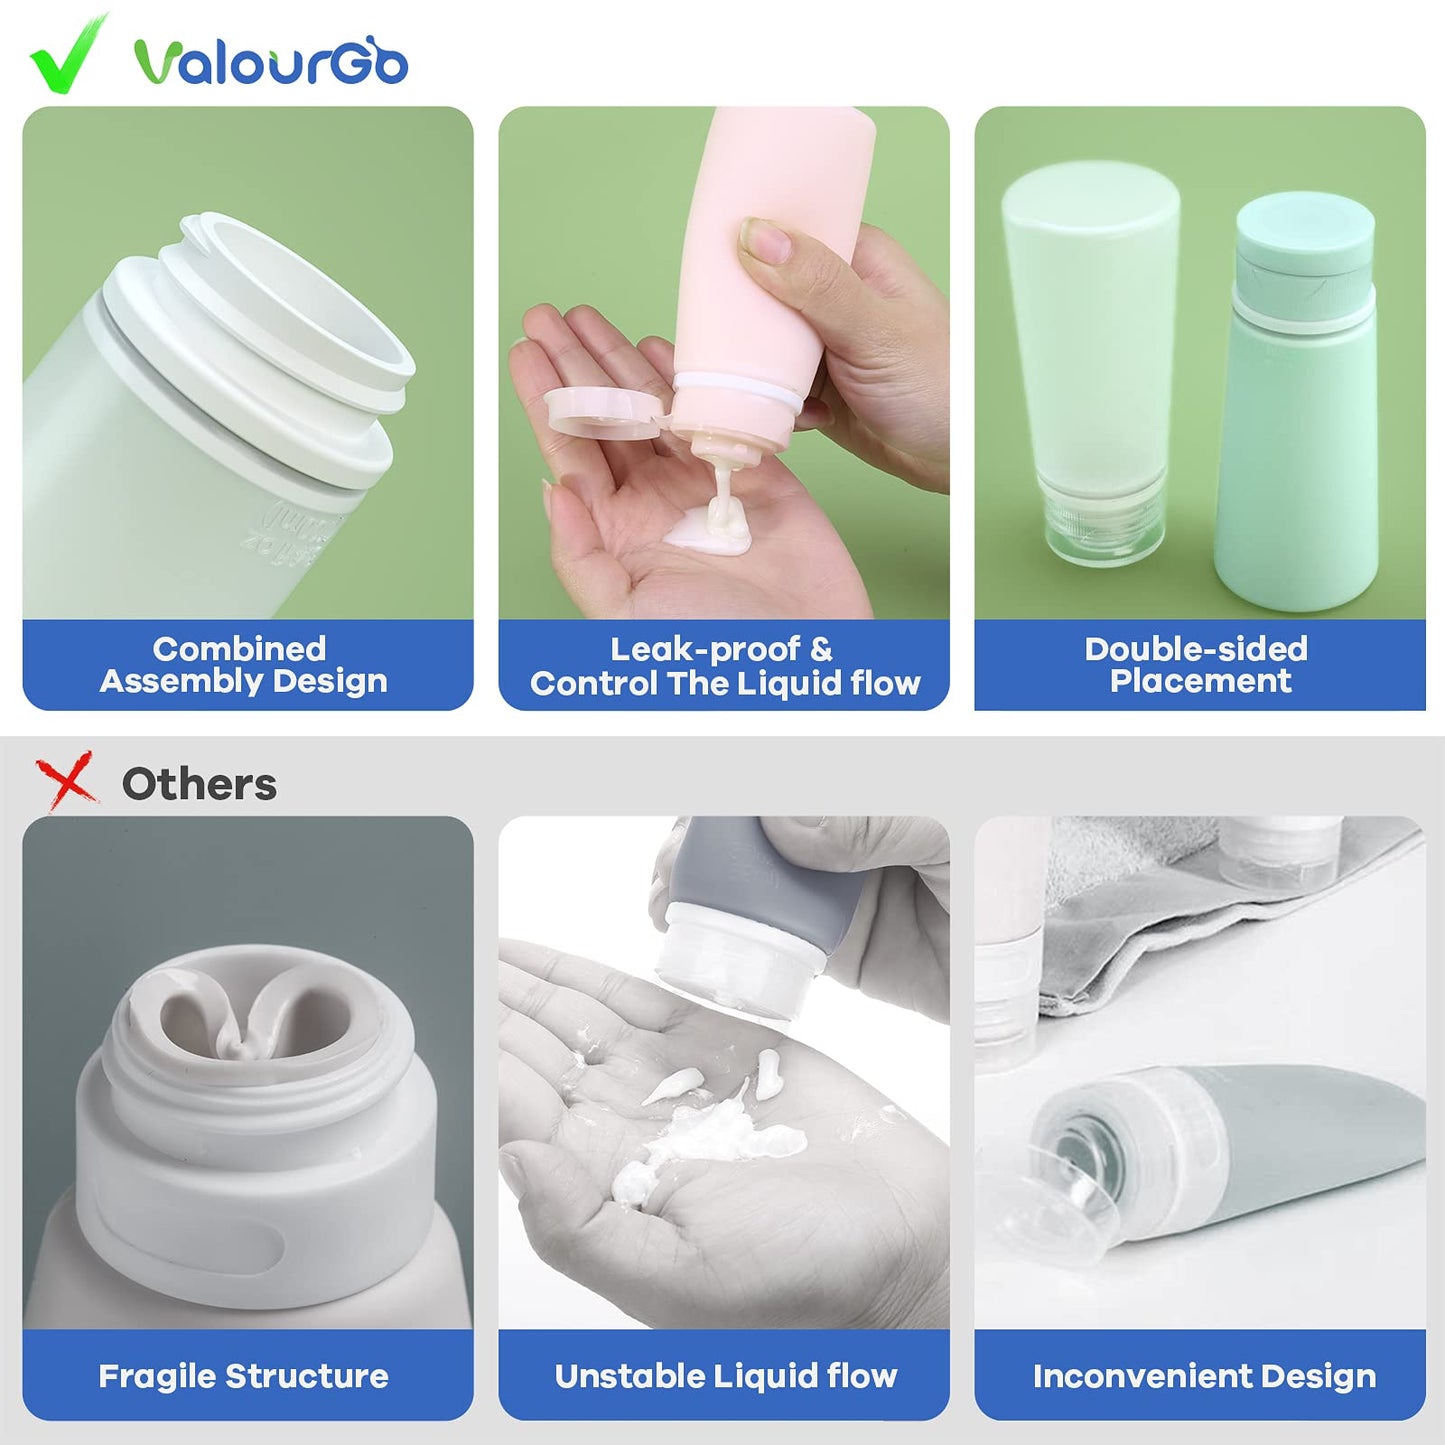 Valourgo Travel Bottles for Toiletries Tsa Approved Travel Size Containers BPA Free Leak Proof Travel Tubes Refillable Liquid Travel Accessories for Cosmetic Shampoo and Lotion Soap for travel, outdoor, GYM and household, Pink, White, Blue, Green